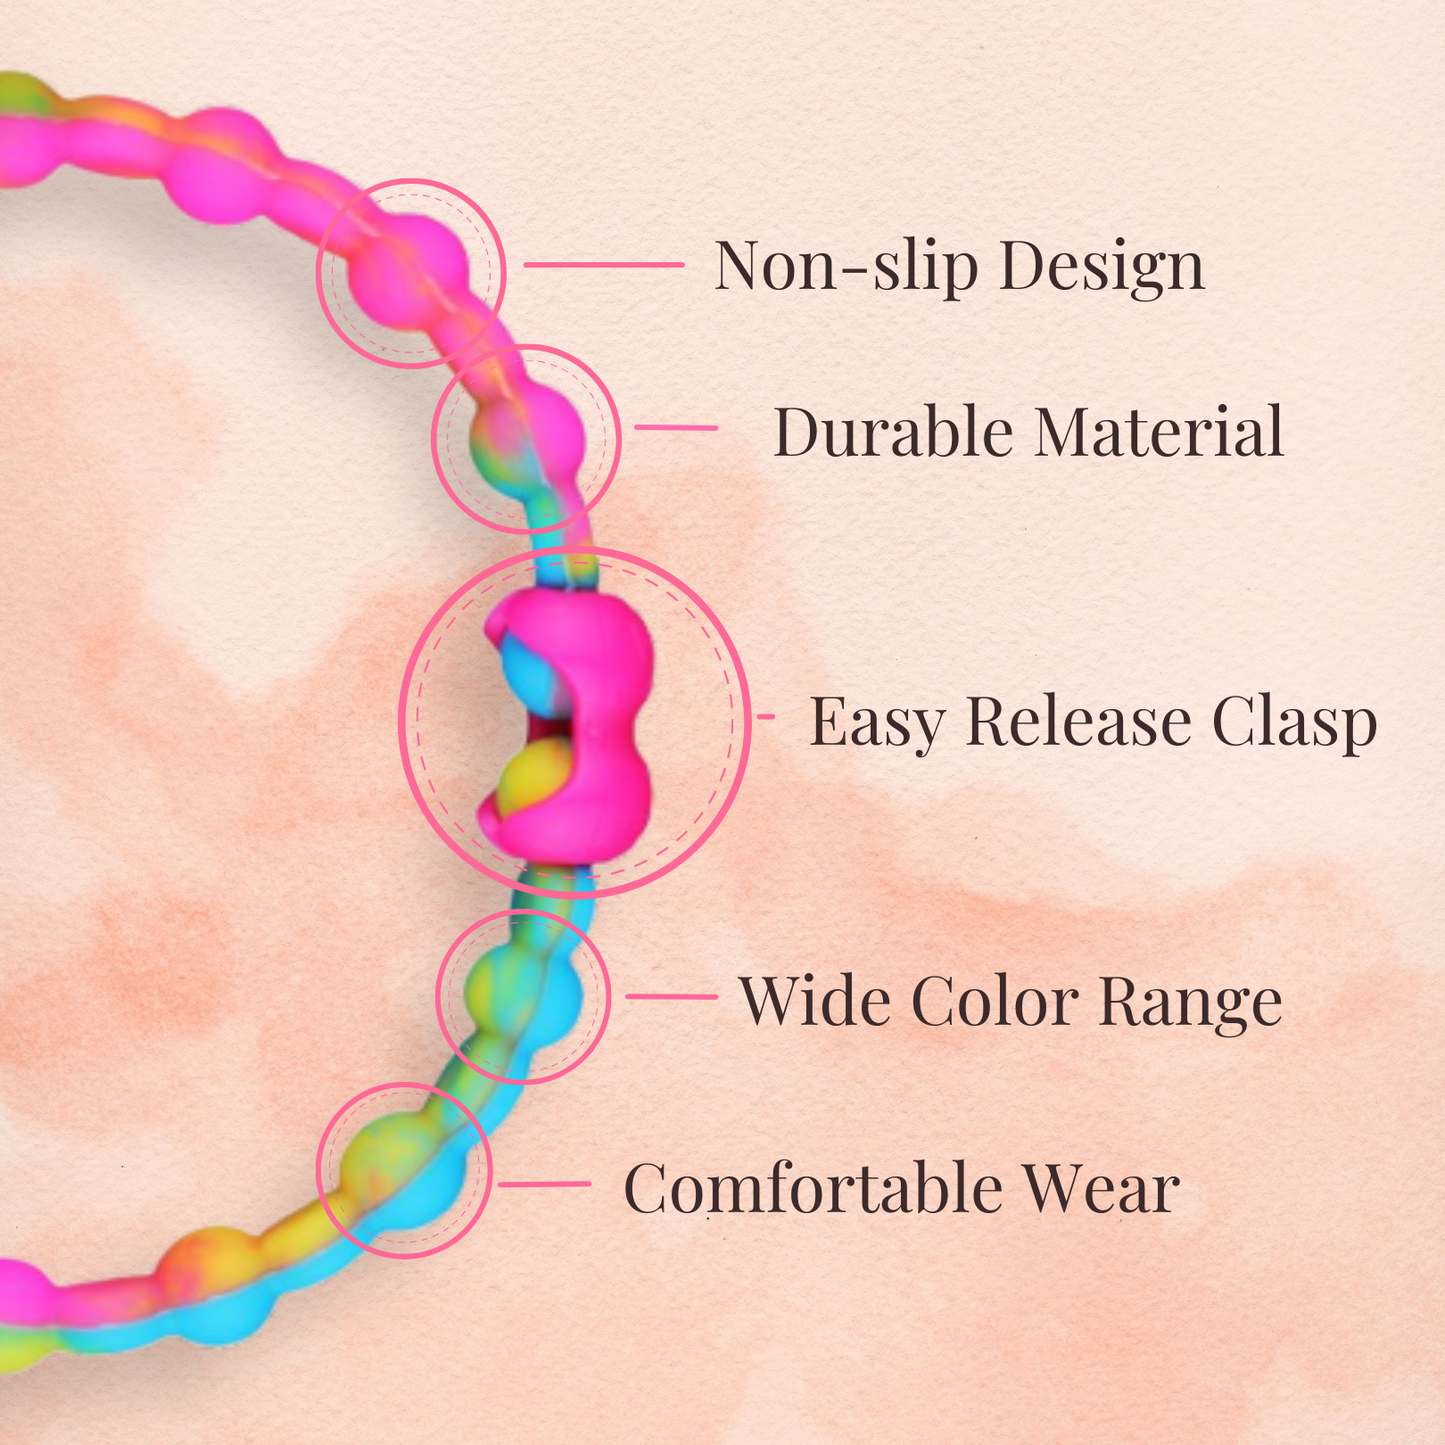 White & Orange Hair Ties (6-Pack) - A Burst of Energy for Every Look